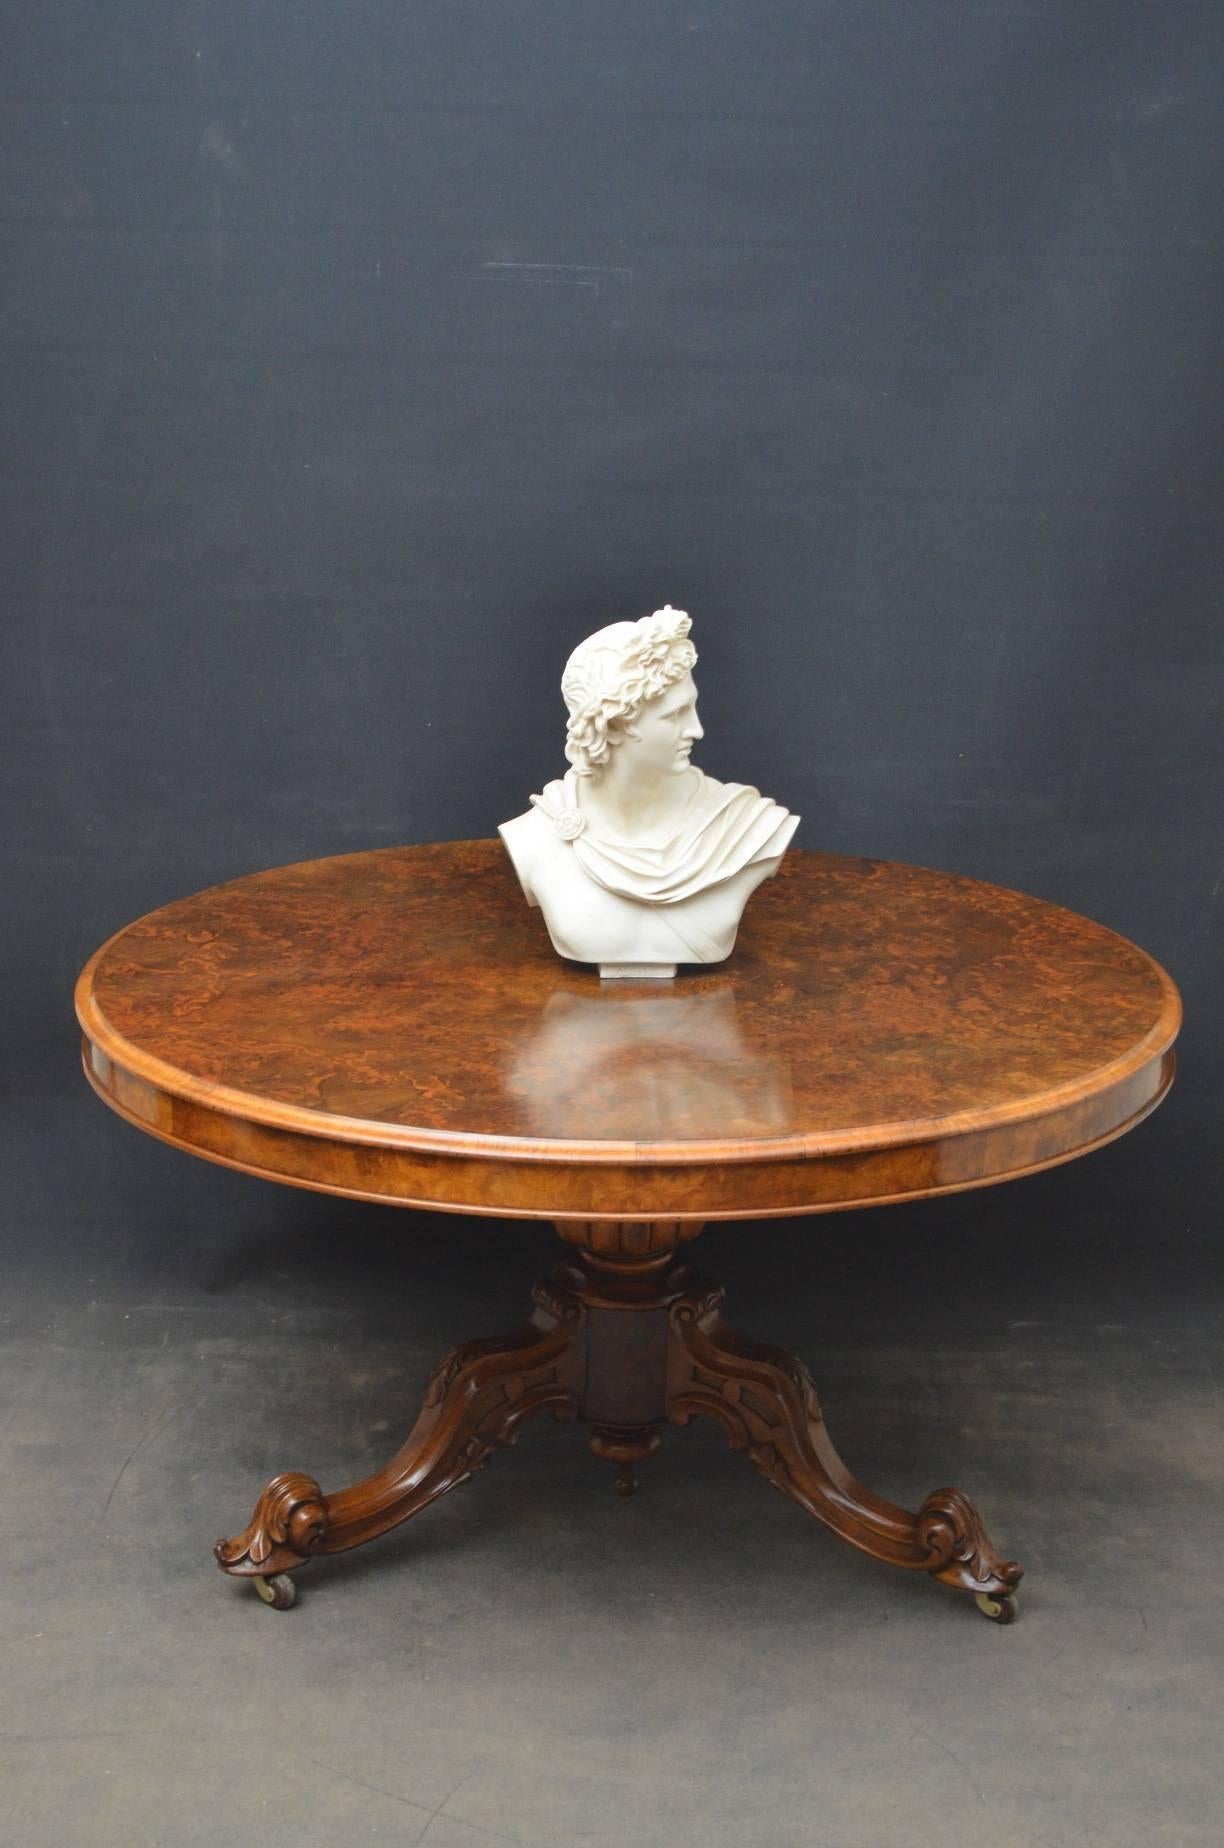 Sn4022 fine quality and very attractive Victorian burr walnut centre table / tilt top table, having stunning burr walnut top with moulded edge, raised on elegant vase shaped column terminating in three scrolled legs and brass castors. This fine